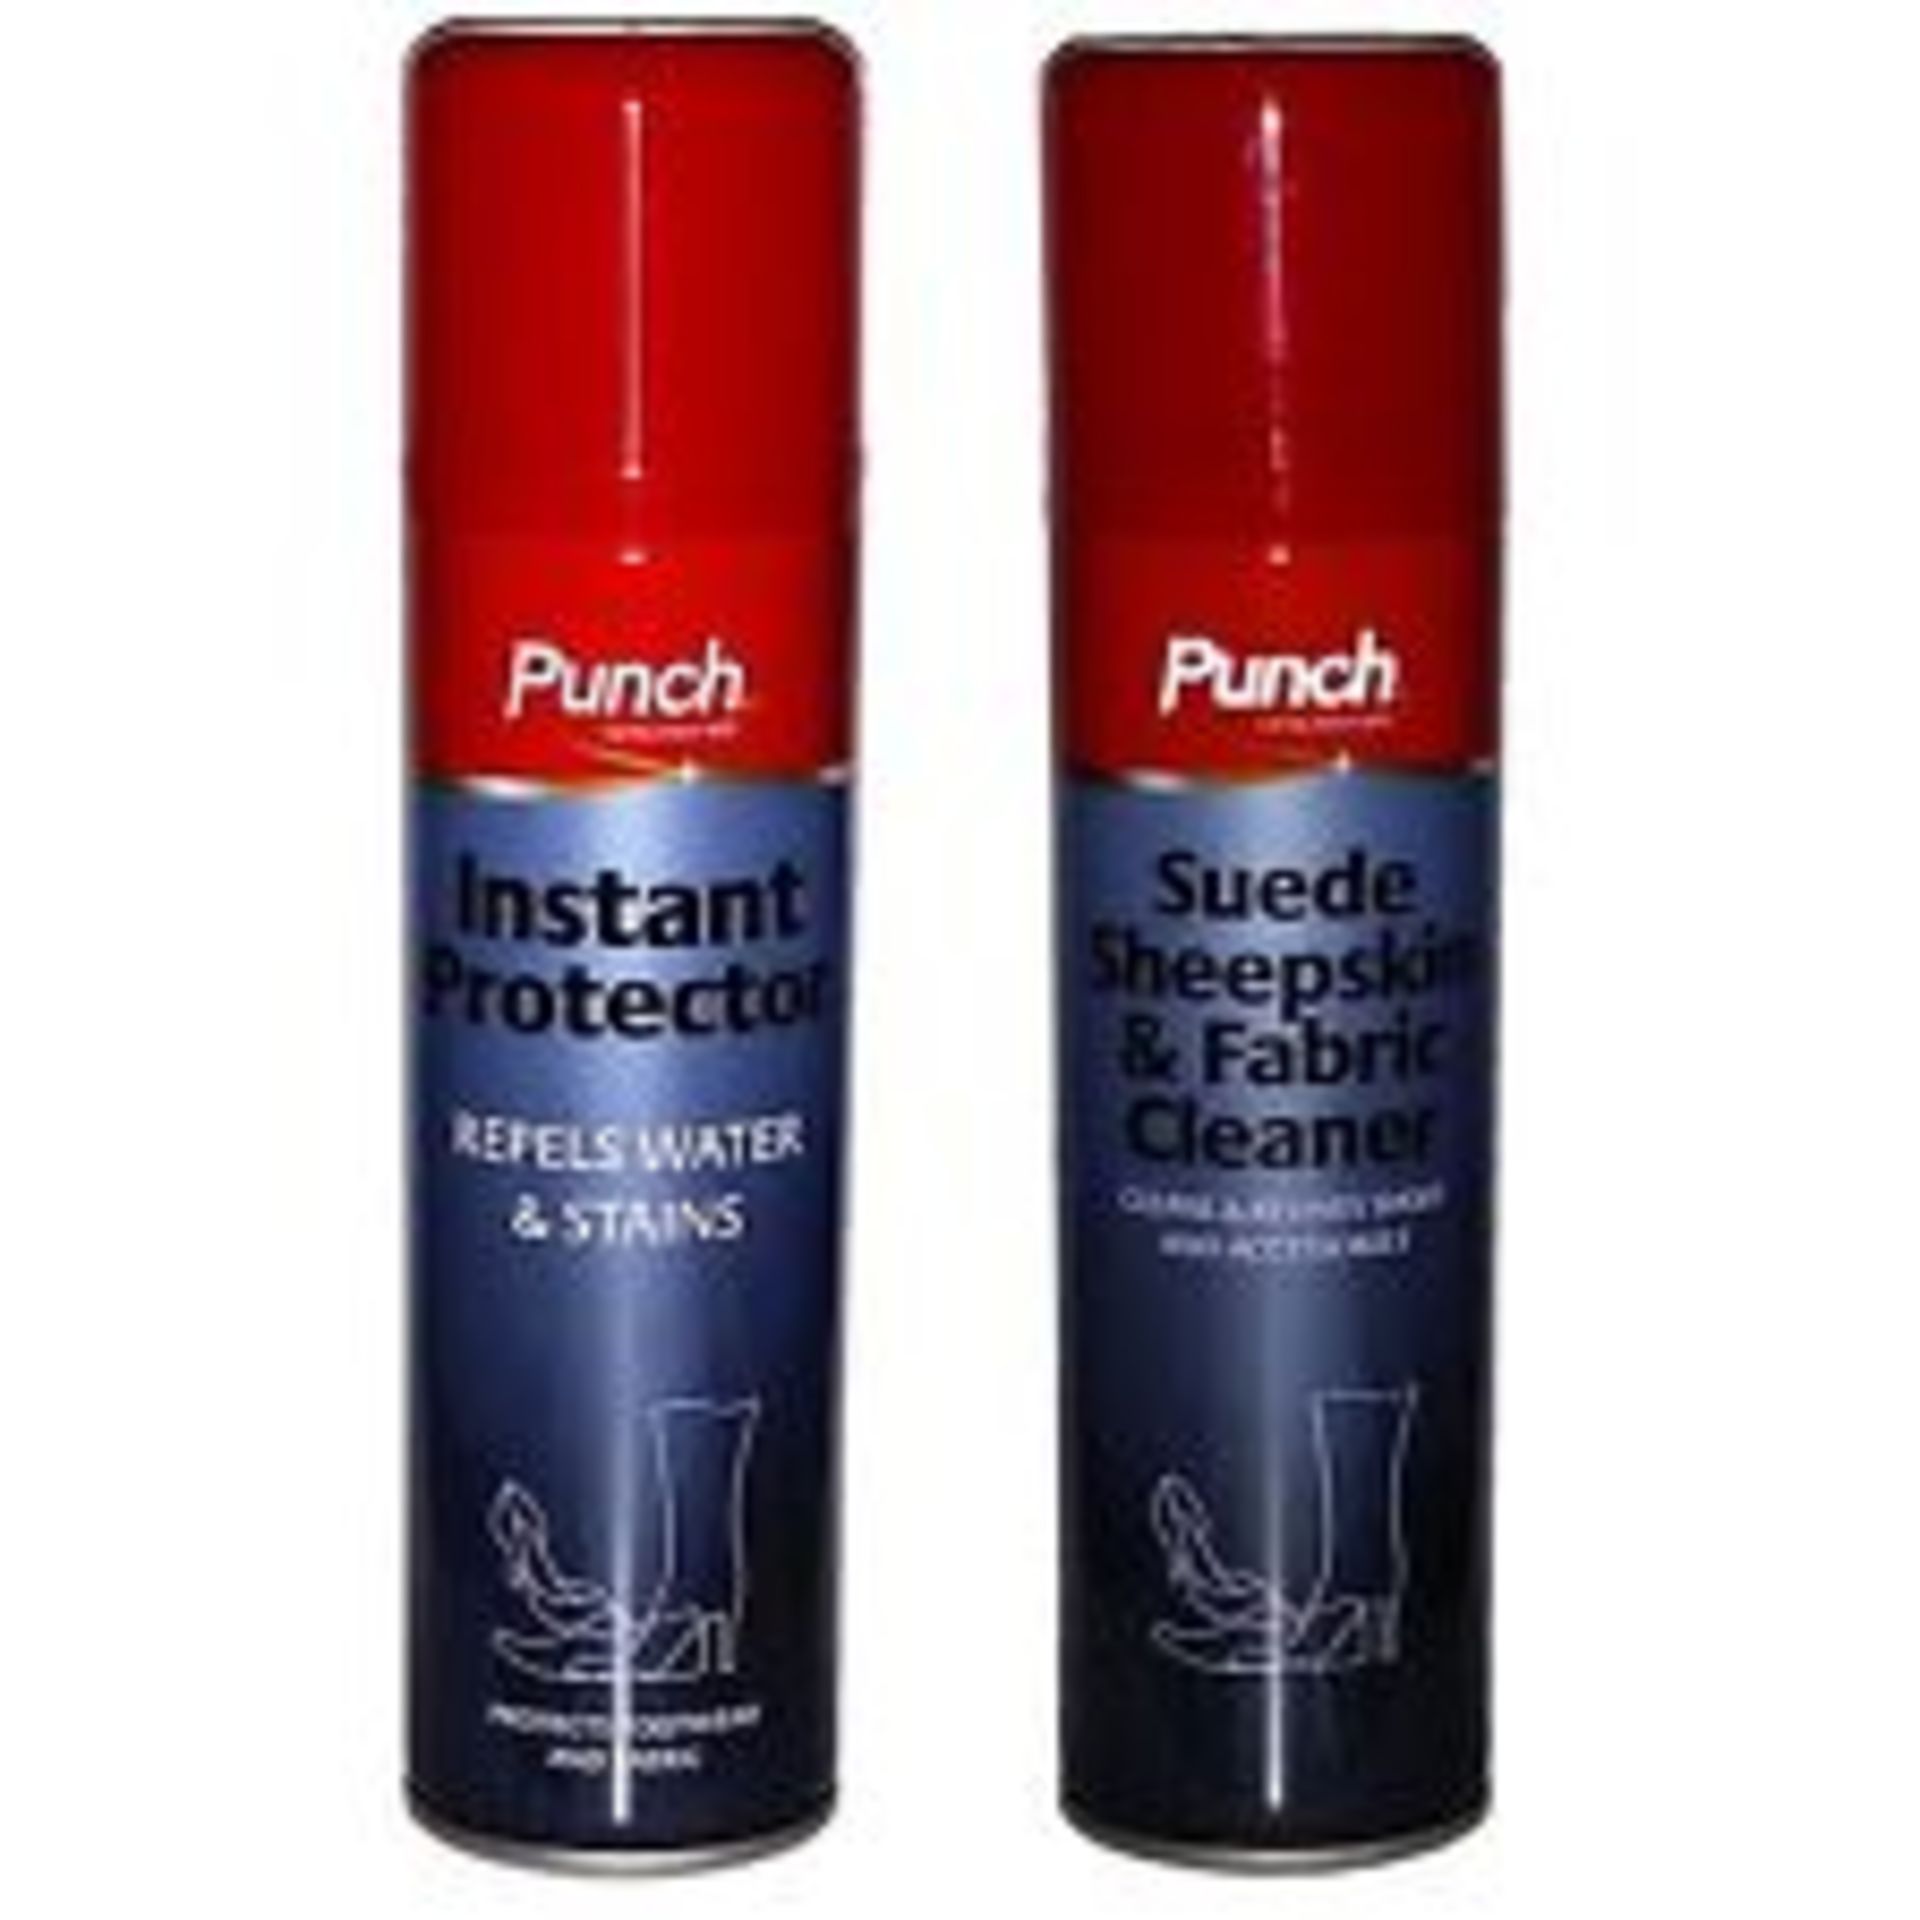 V Brand New Job Lot of Six (6) 400ml Cans Punch Spray Protector For Shoes & Boots ISP £53 (Product